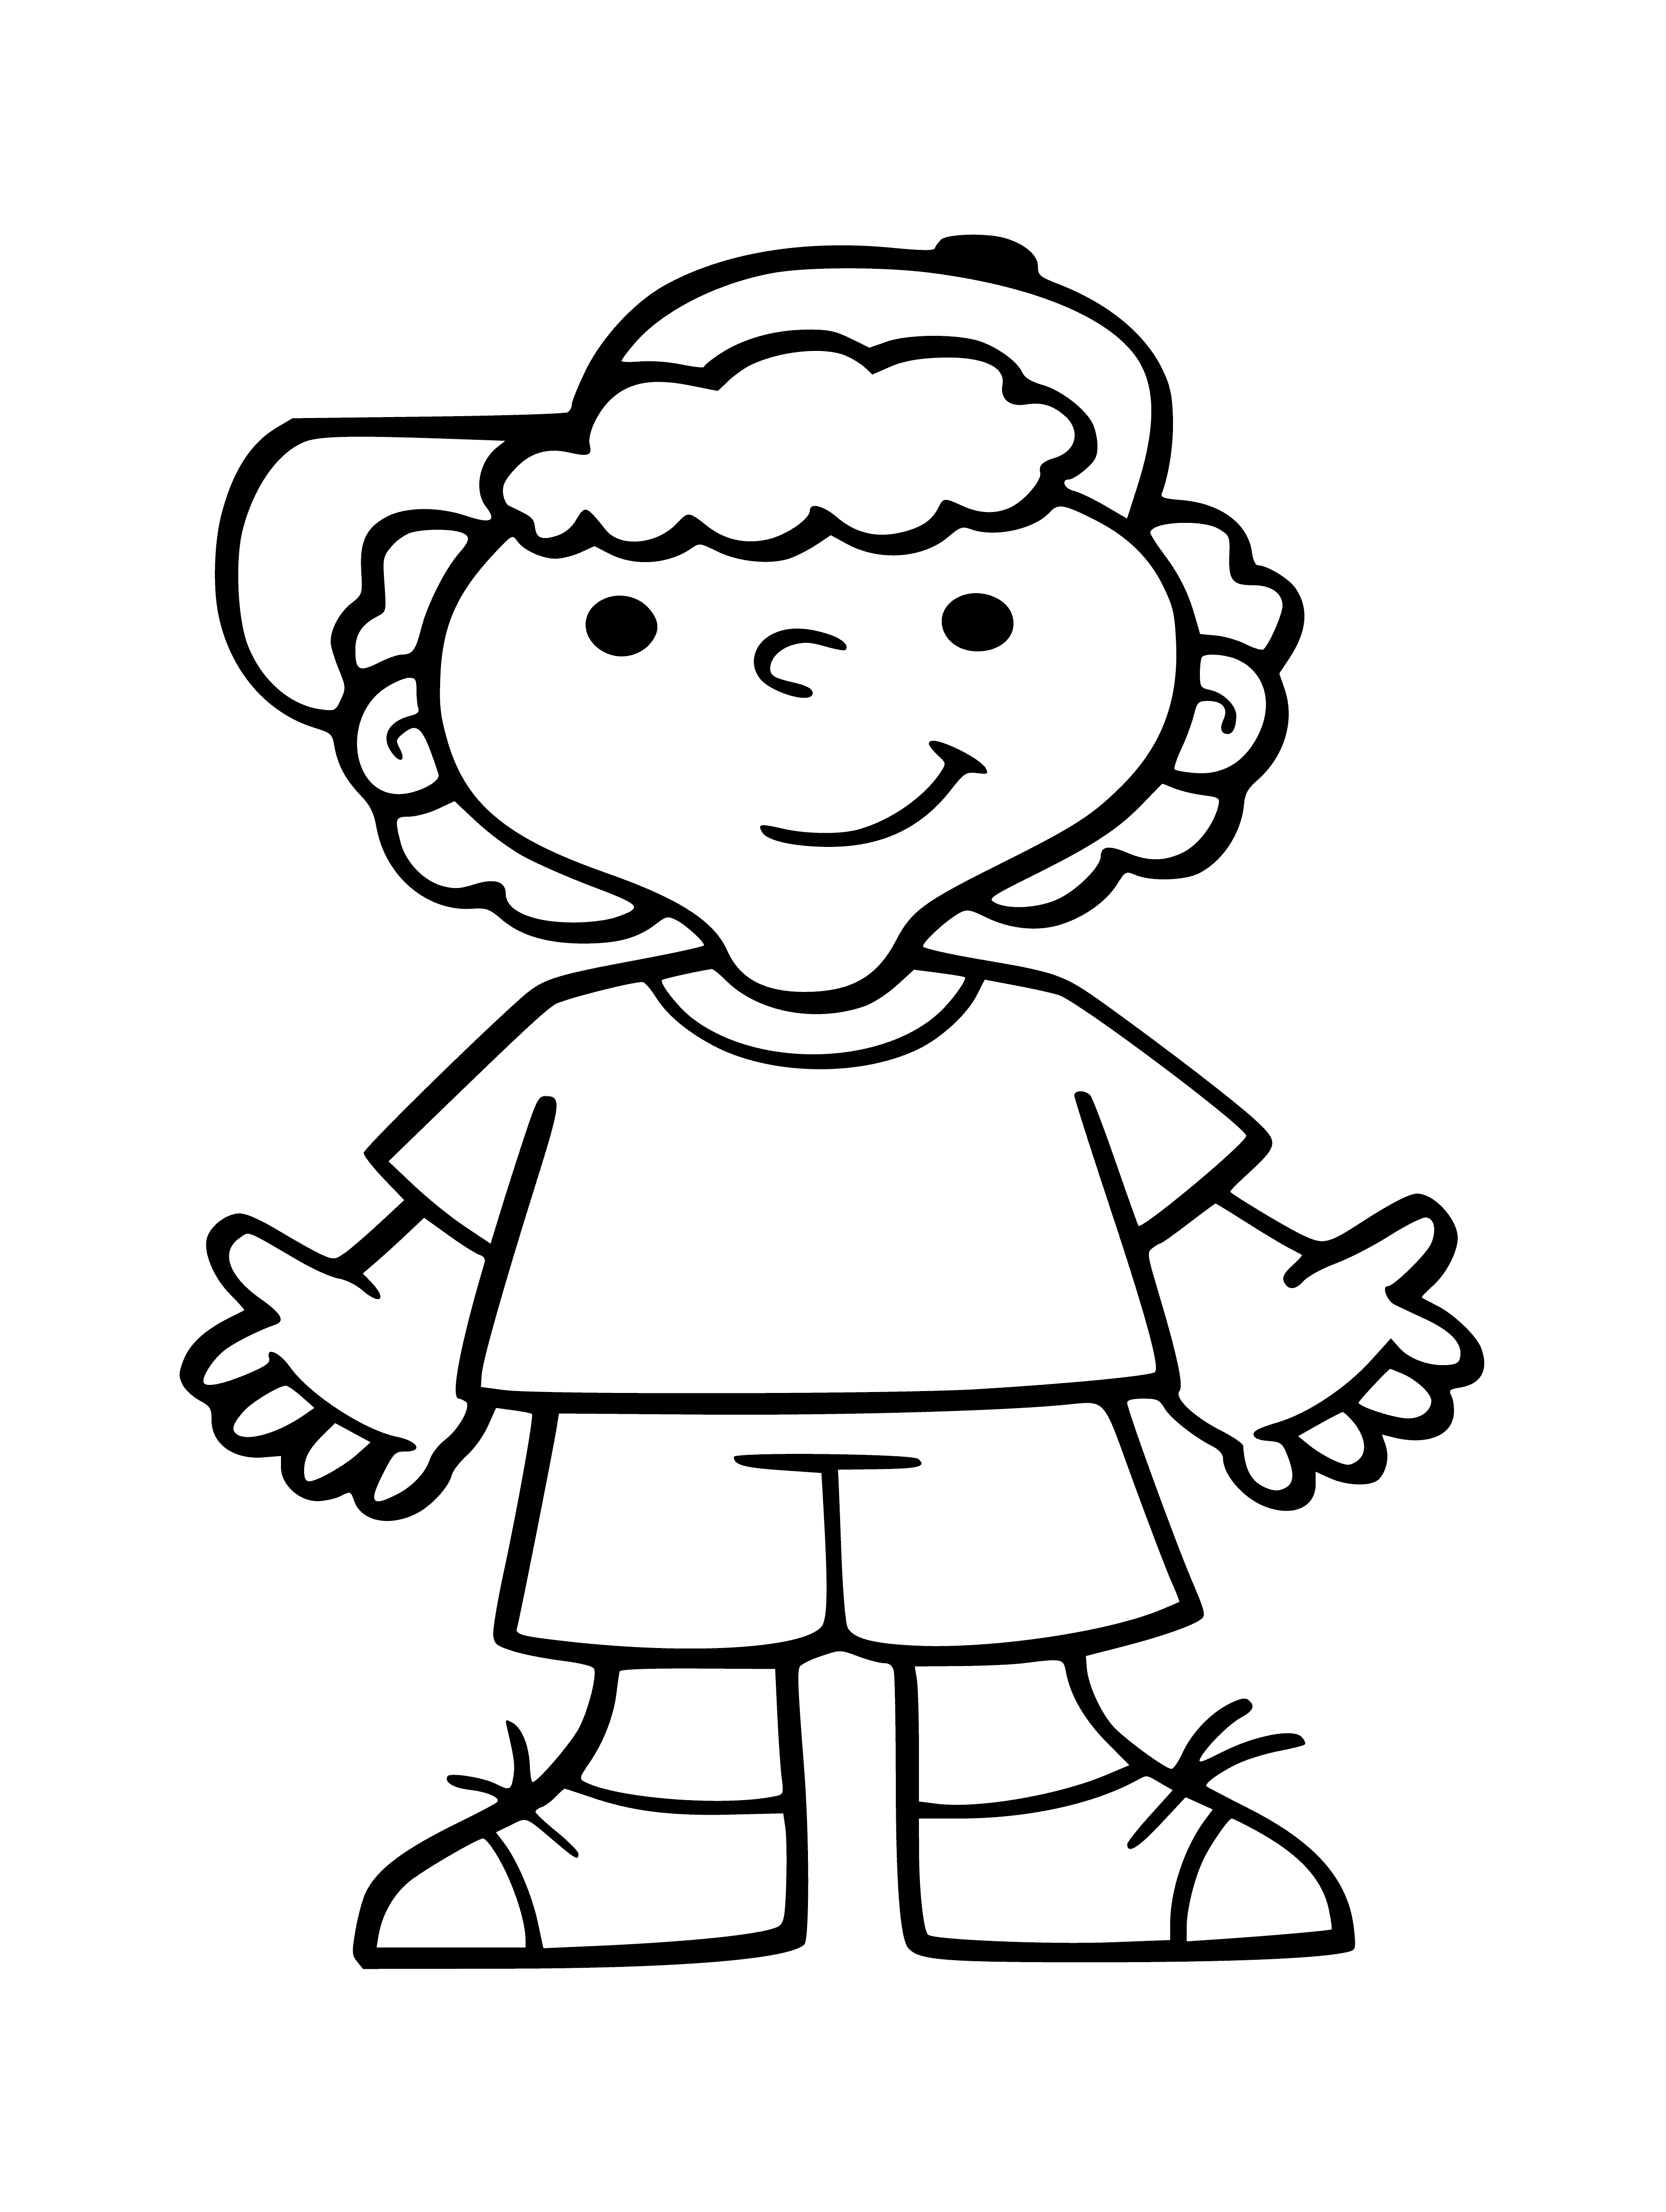 coloring page: Boy wearing cap stands on stool, holding pointer, pointing something on blackboard in coloring page.